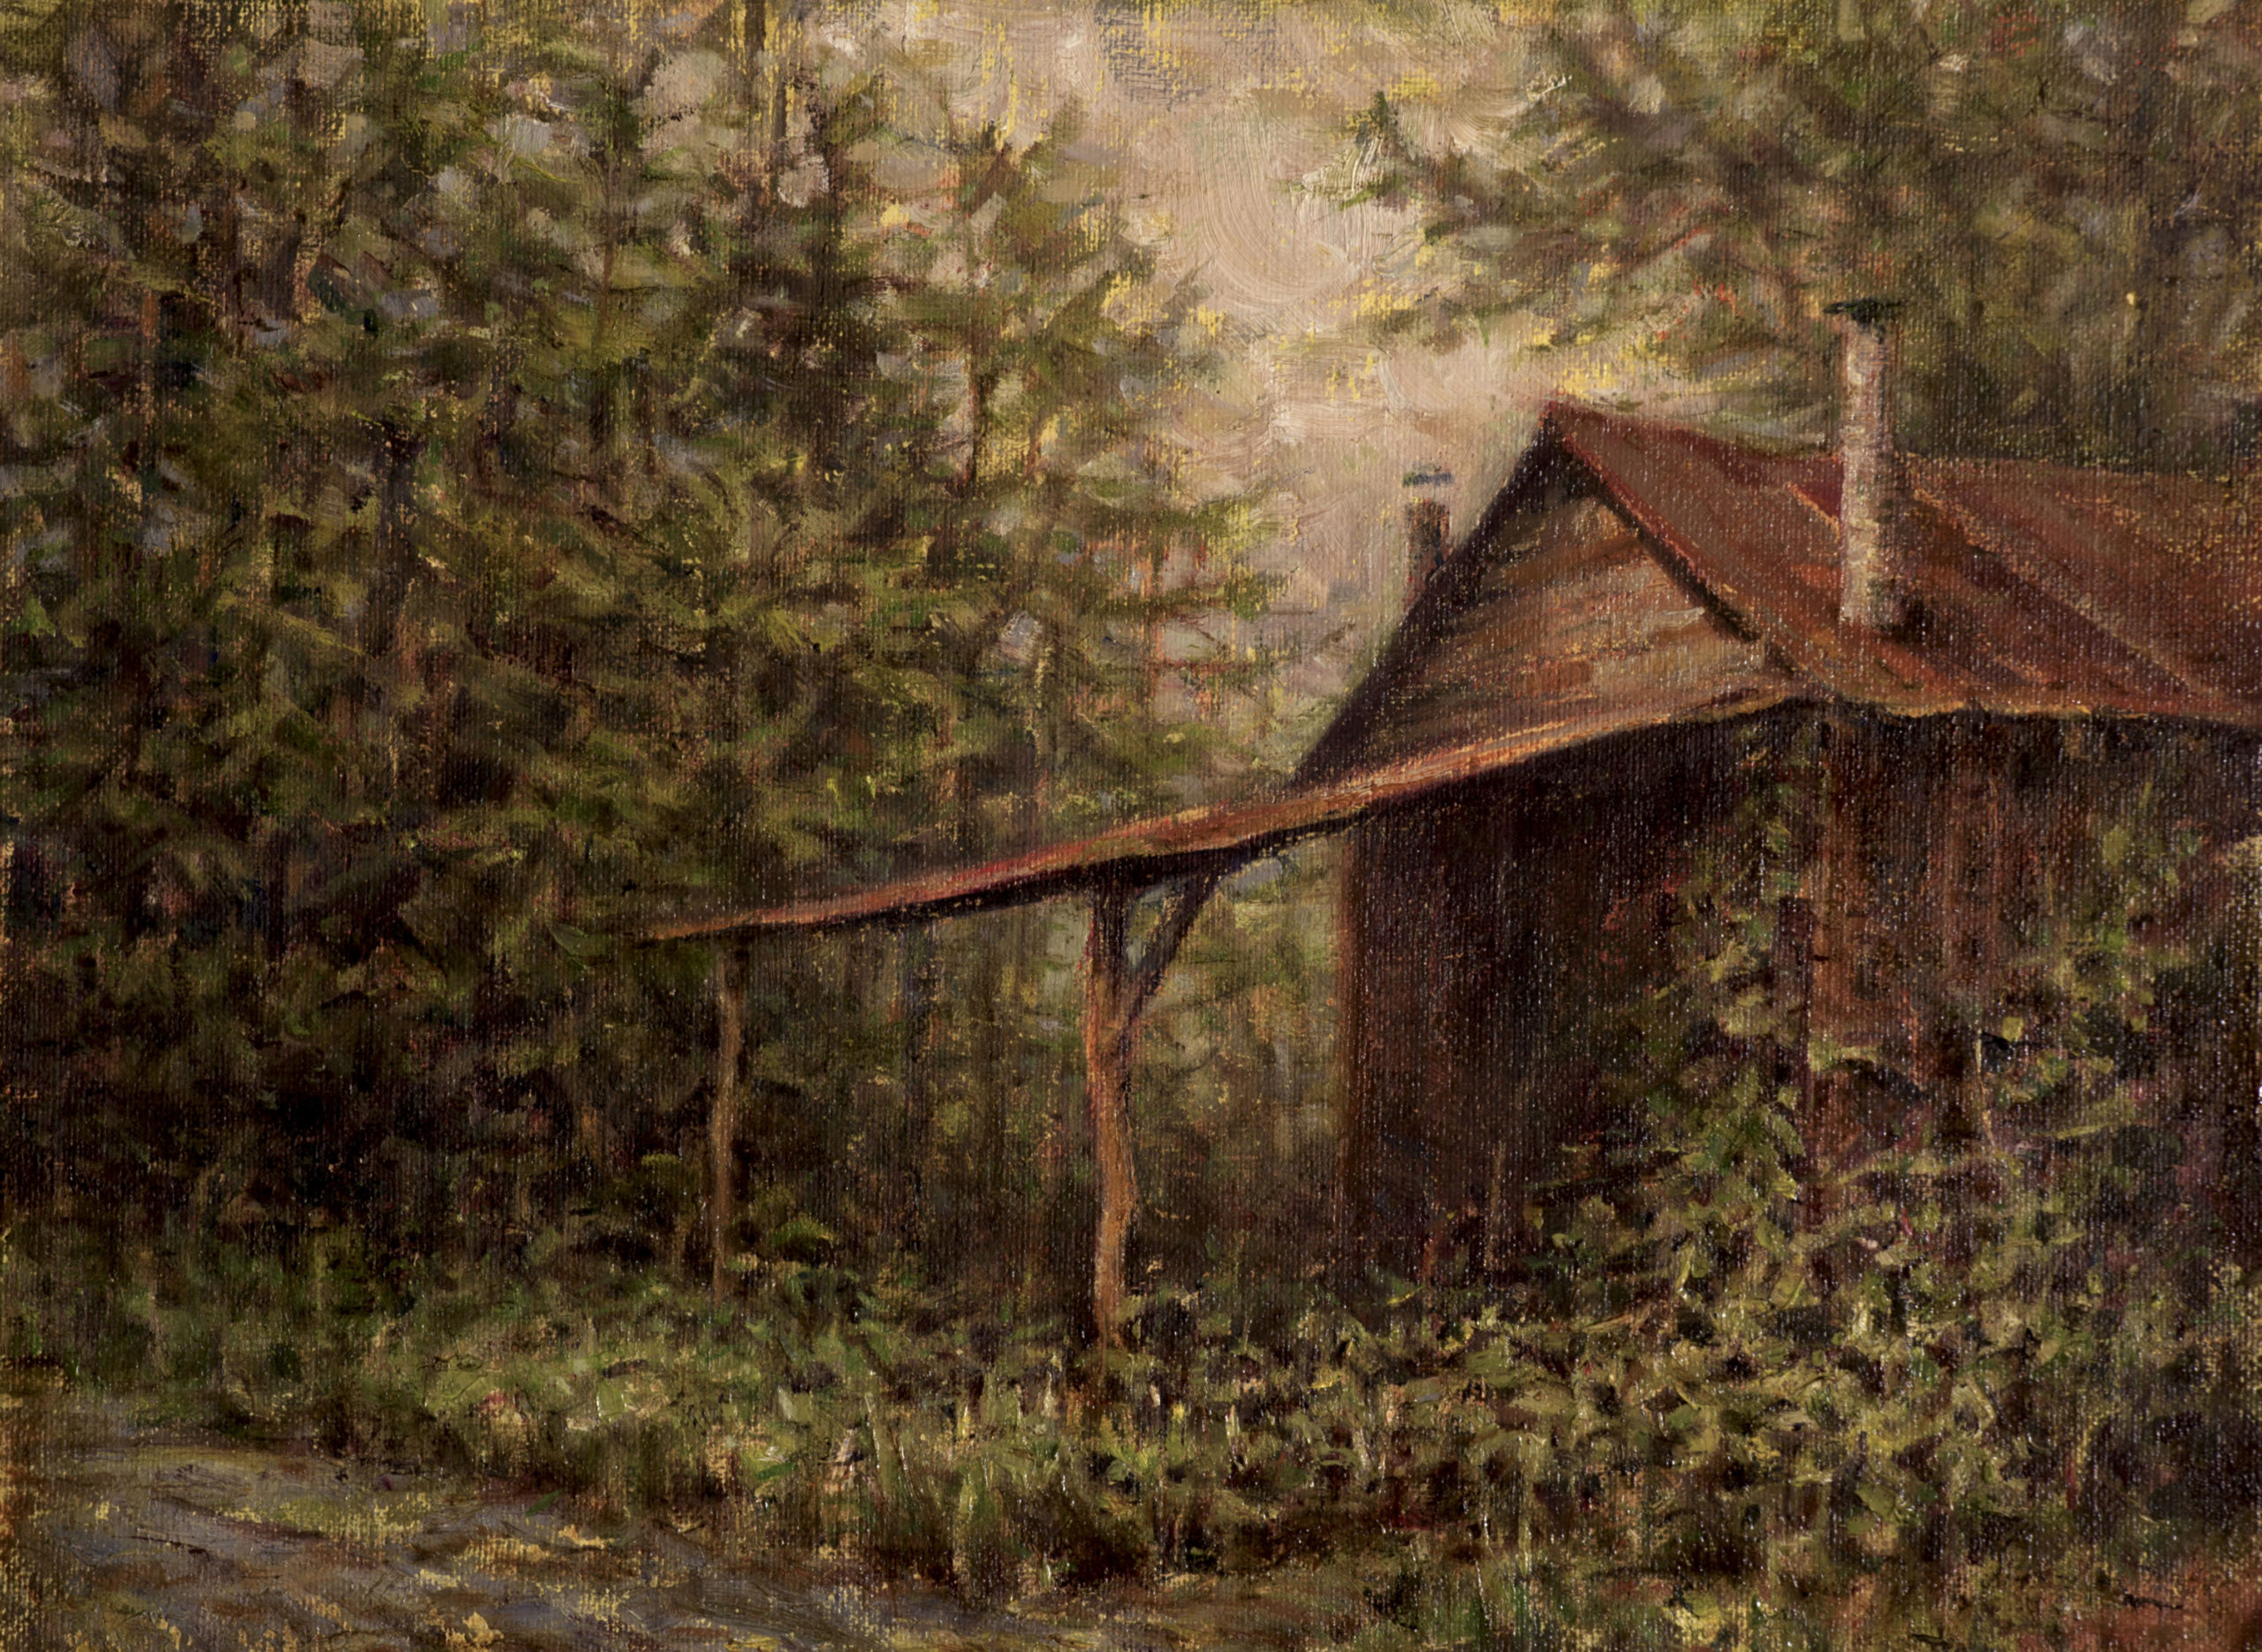 Copperhead Road by Gerry O’Neill, oil on canvas, 9×12 at Craven Allen Gallery